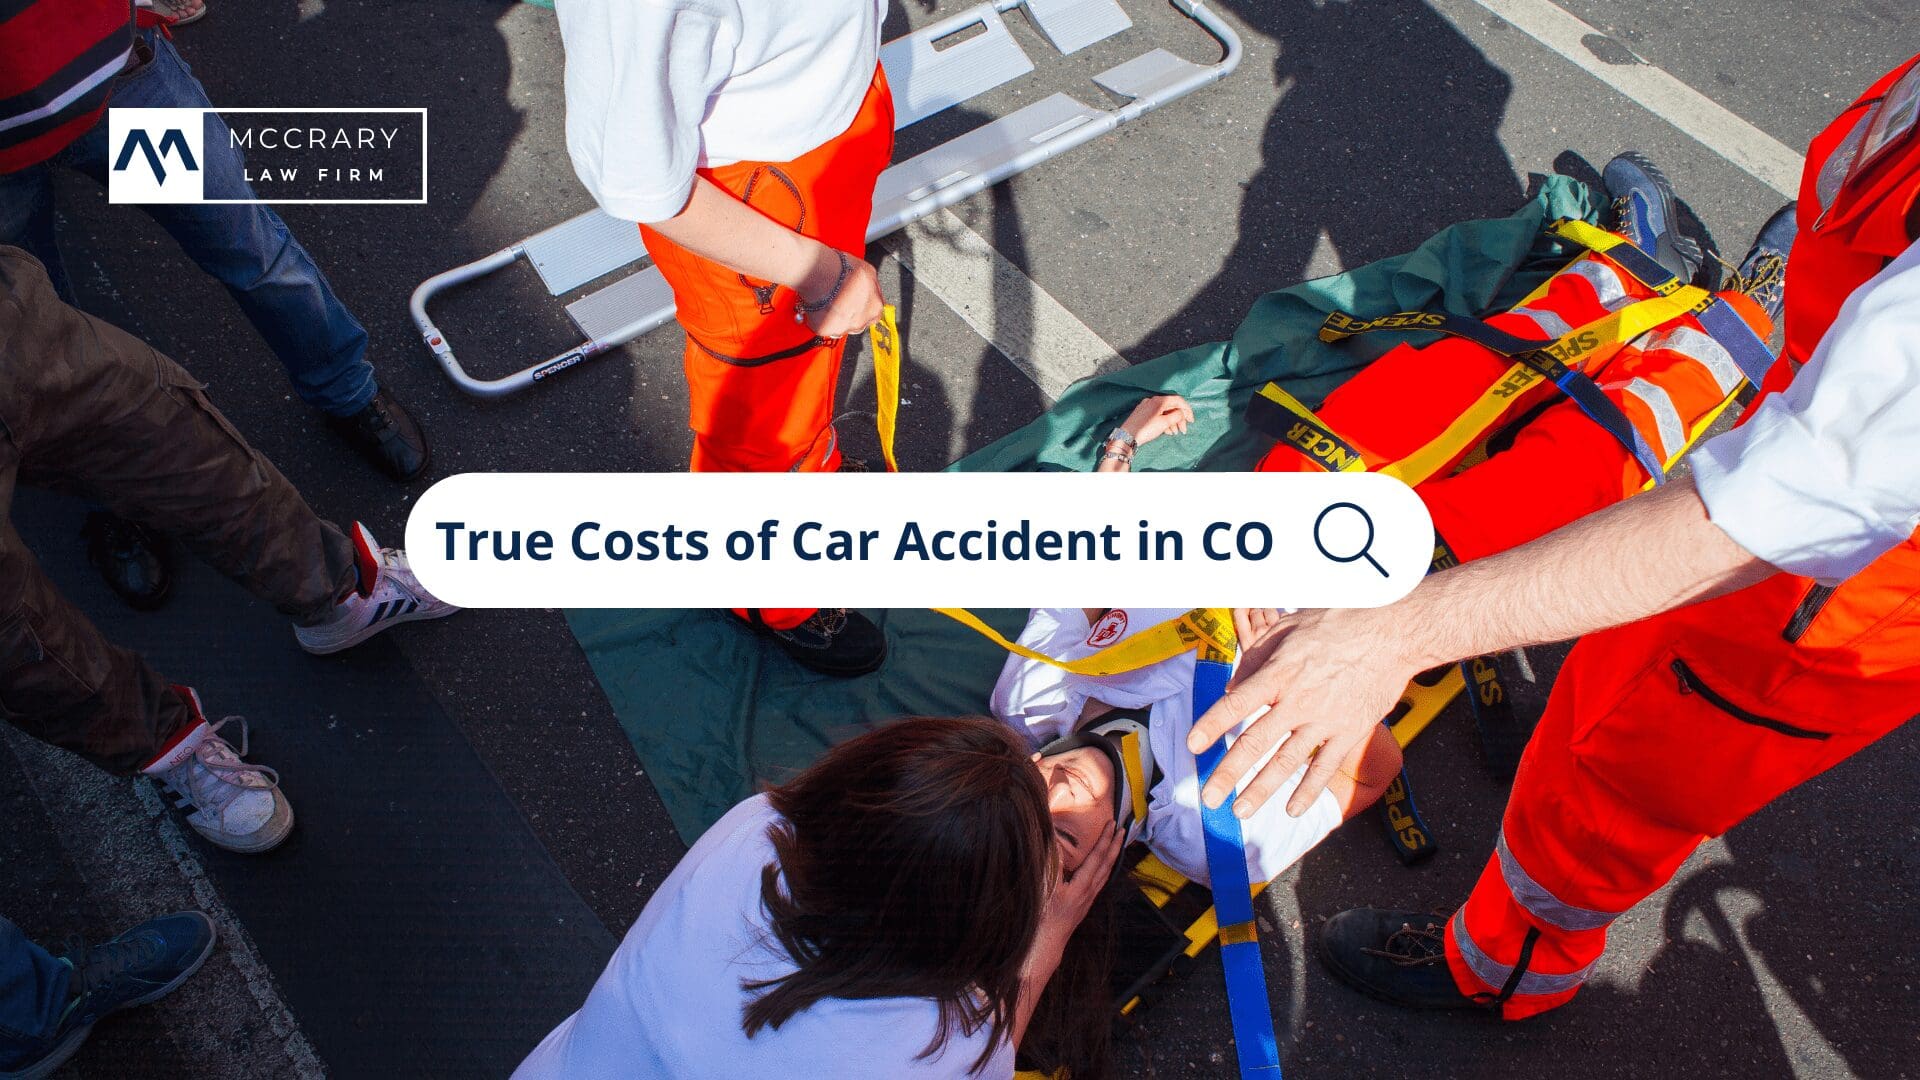 Colorado Car Accidents: The True Costs & Legal Aid | The McCrary Law Firm